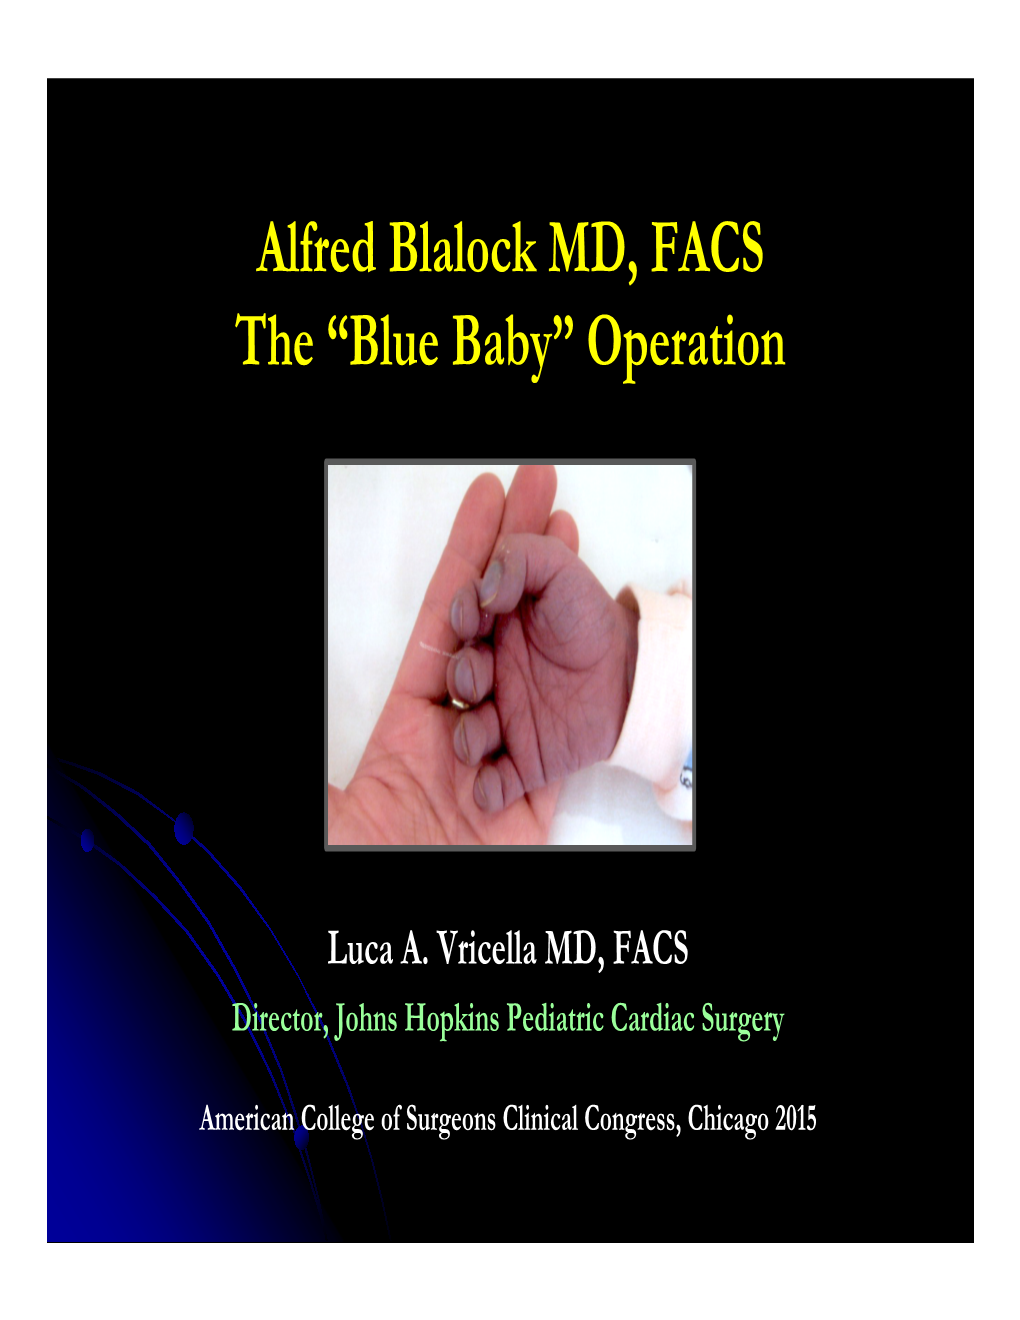 Alfred Blalock MD, FACS the “Blue Baby” Operation